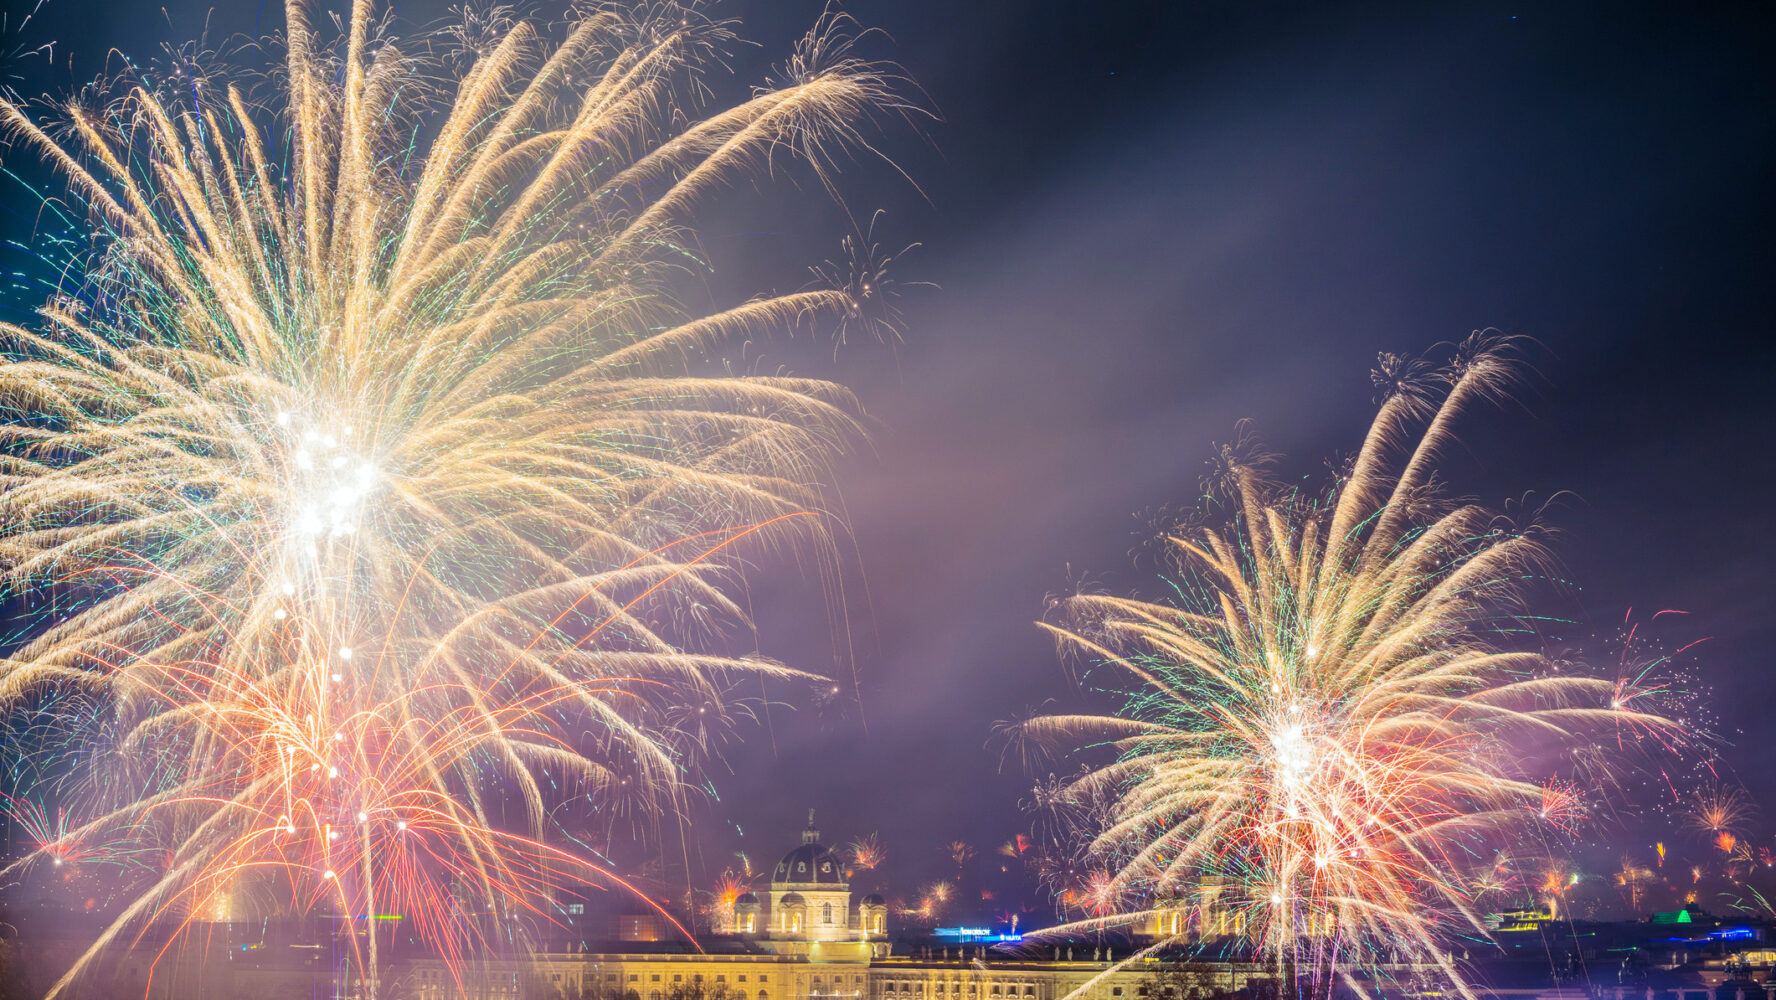 thrilling fireworks light up the Vienna night sky to welcome the new year